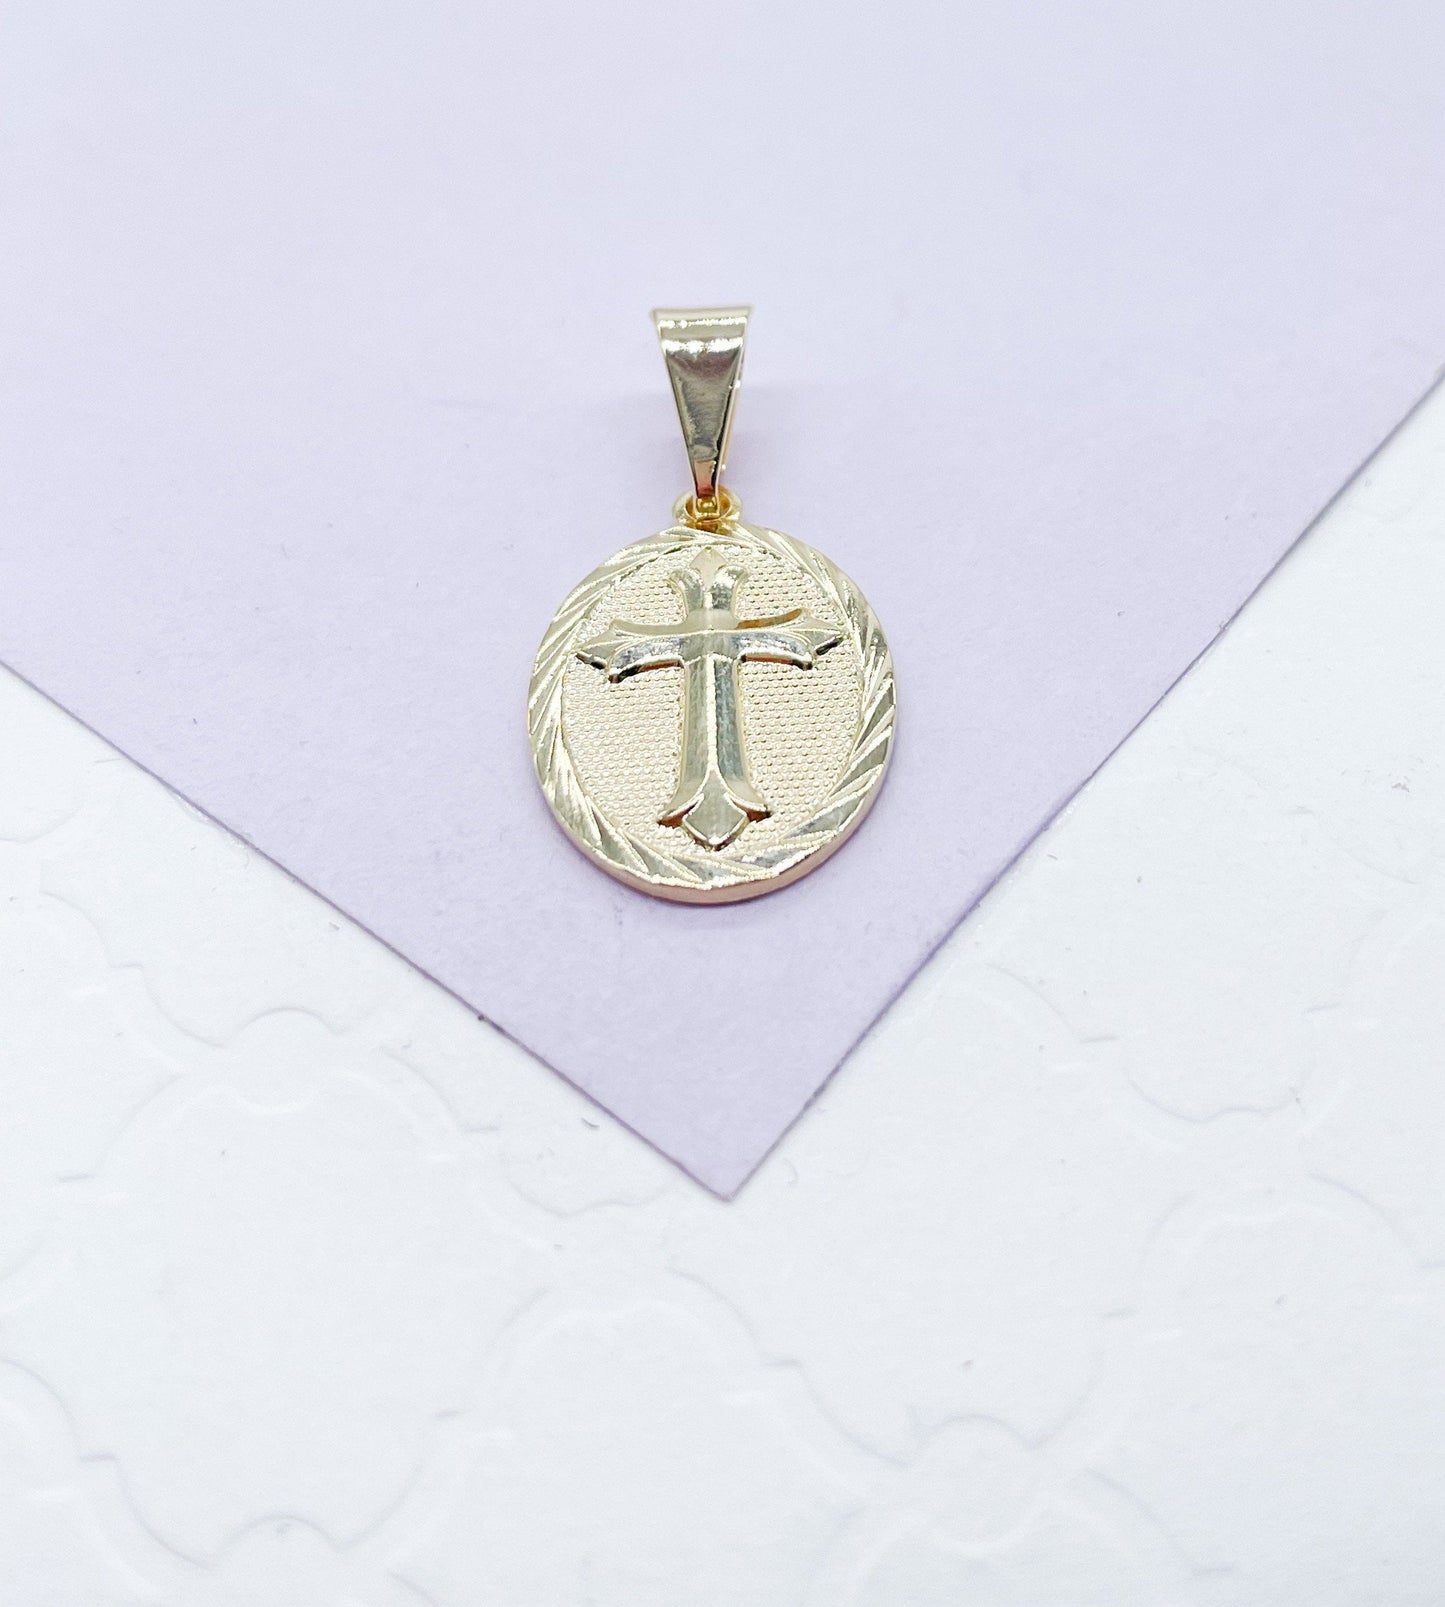 18k Gold Filled Oval Shaped Medallion Pendant With Engraved Cross In Center